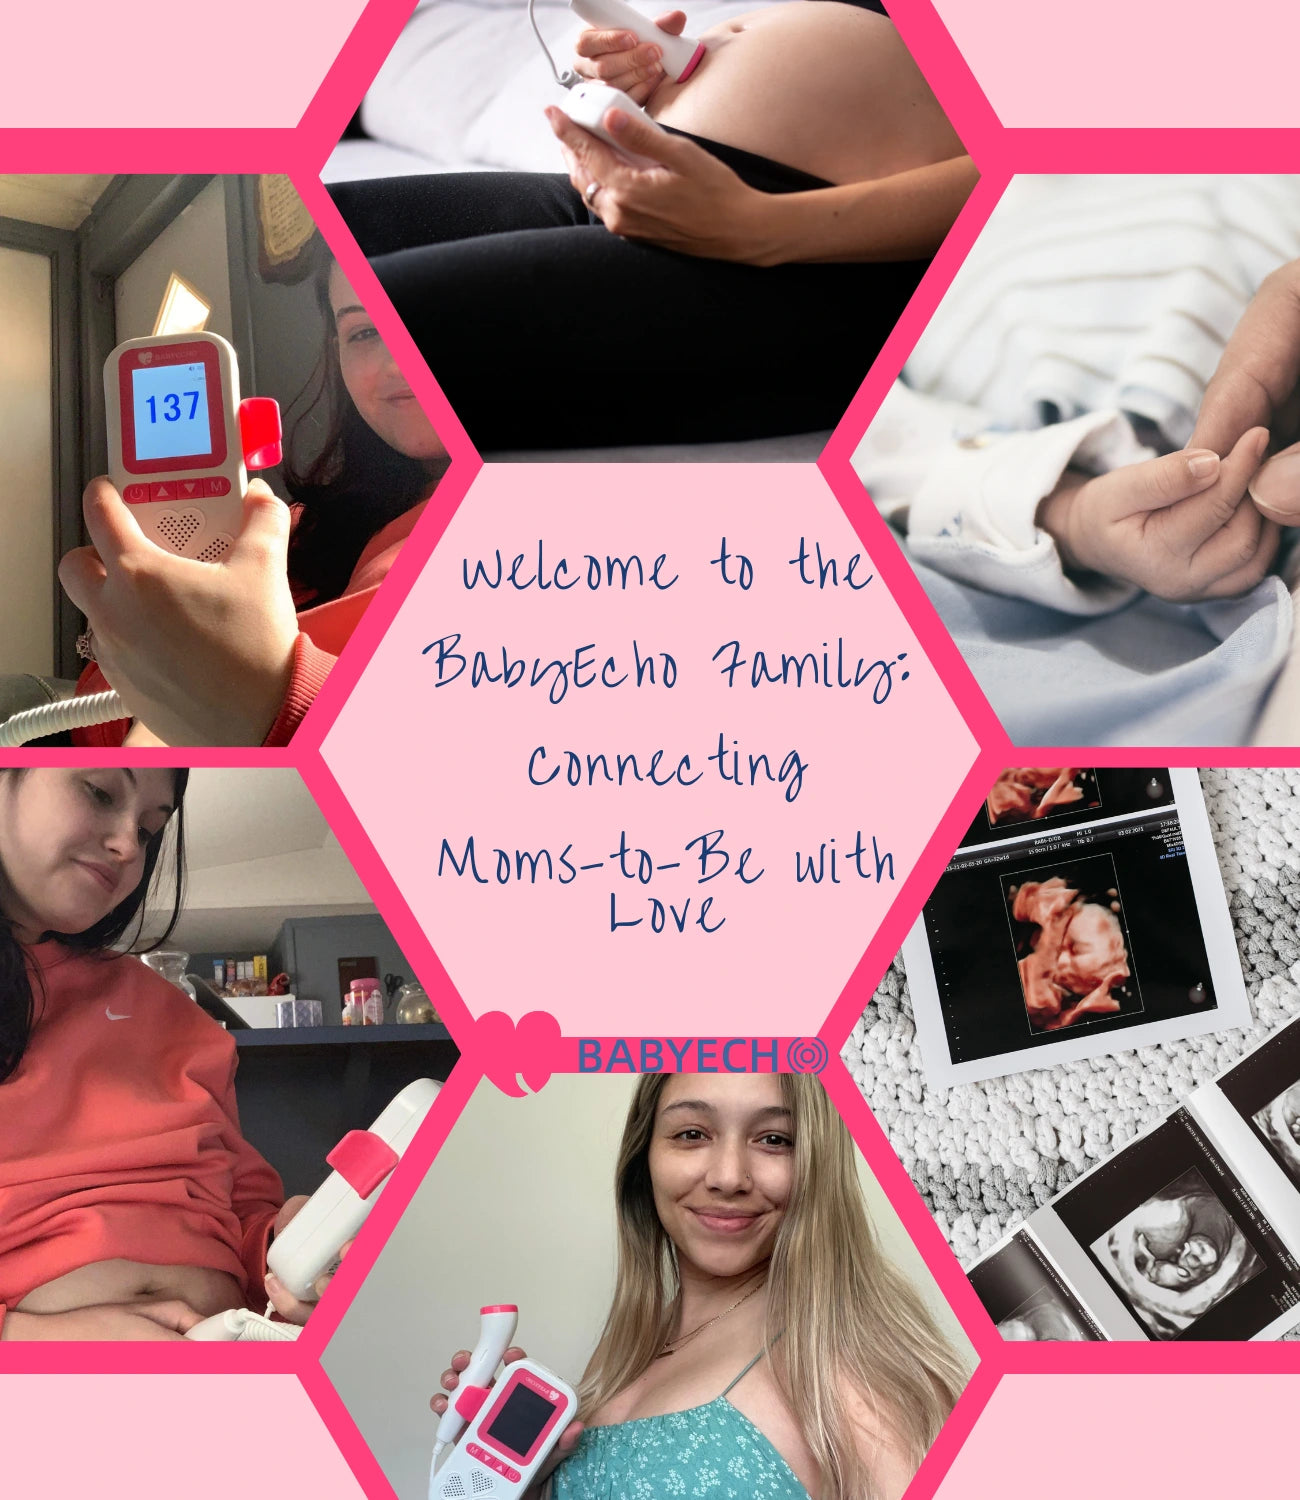 Moms to Be Share Your Pregnancy Moments with BabyEcho